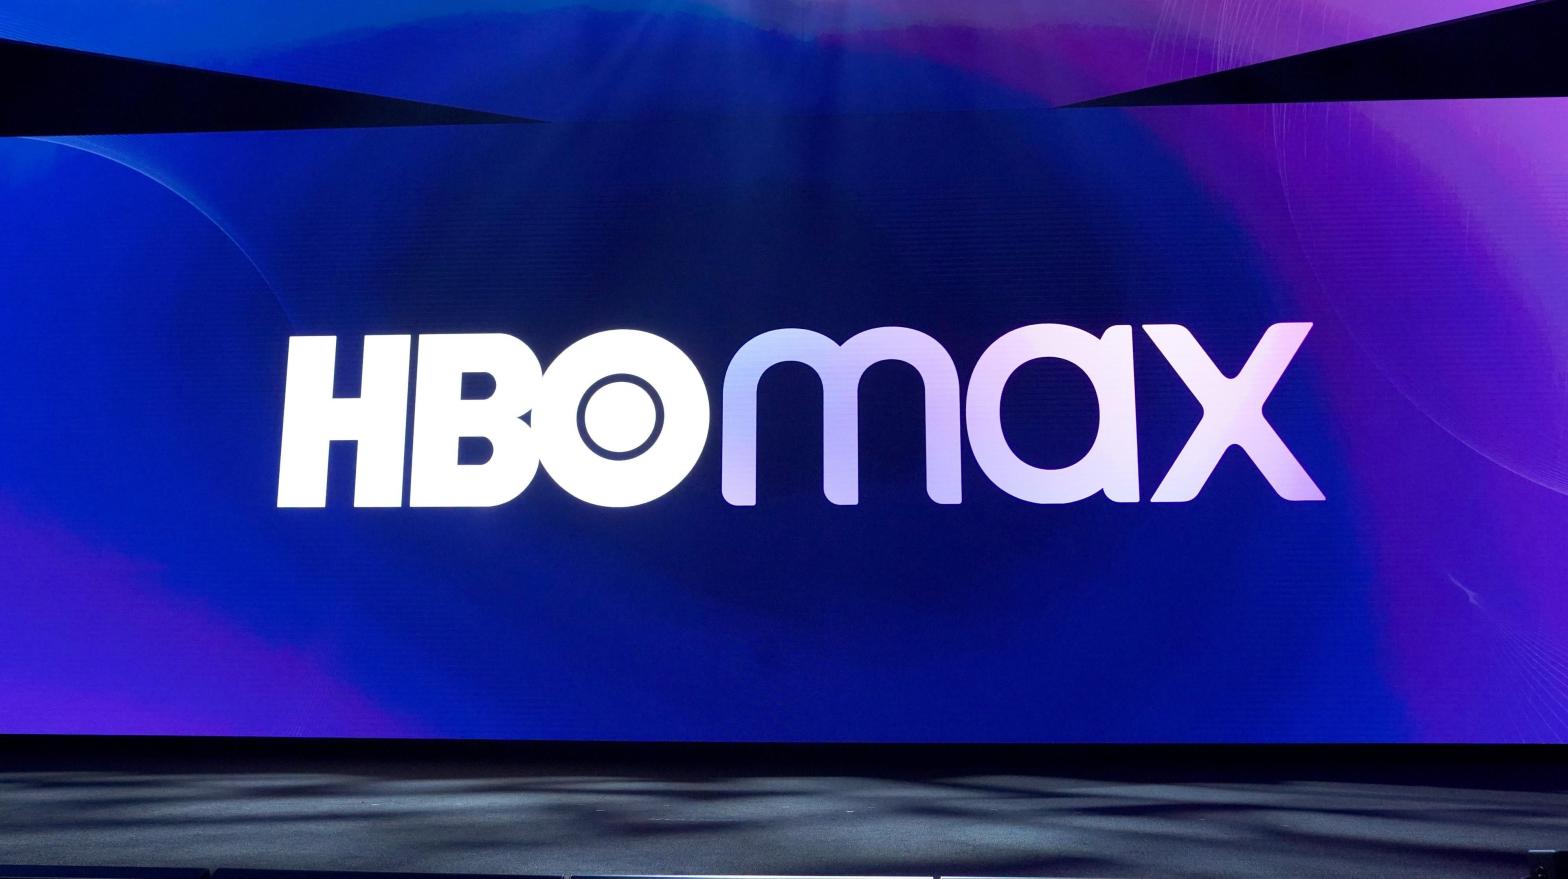 HBO Max is turning into a shell of its former self, bit by bloody bit. (Image: Presley Ann, Getty Images)